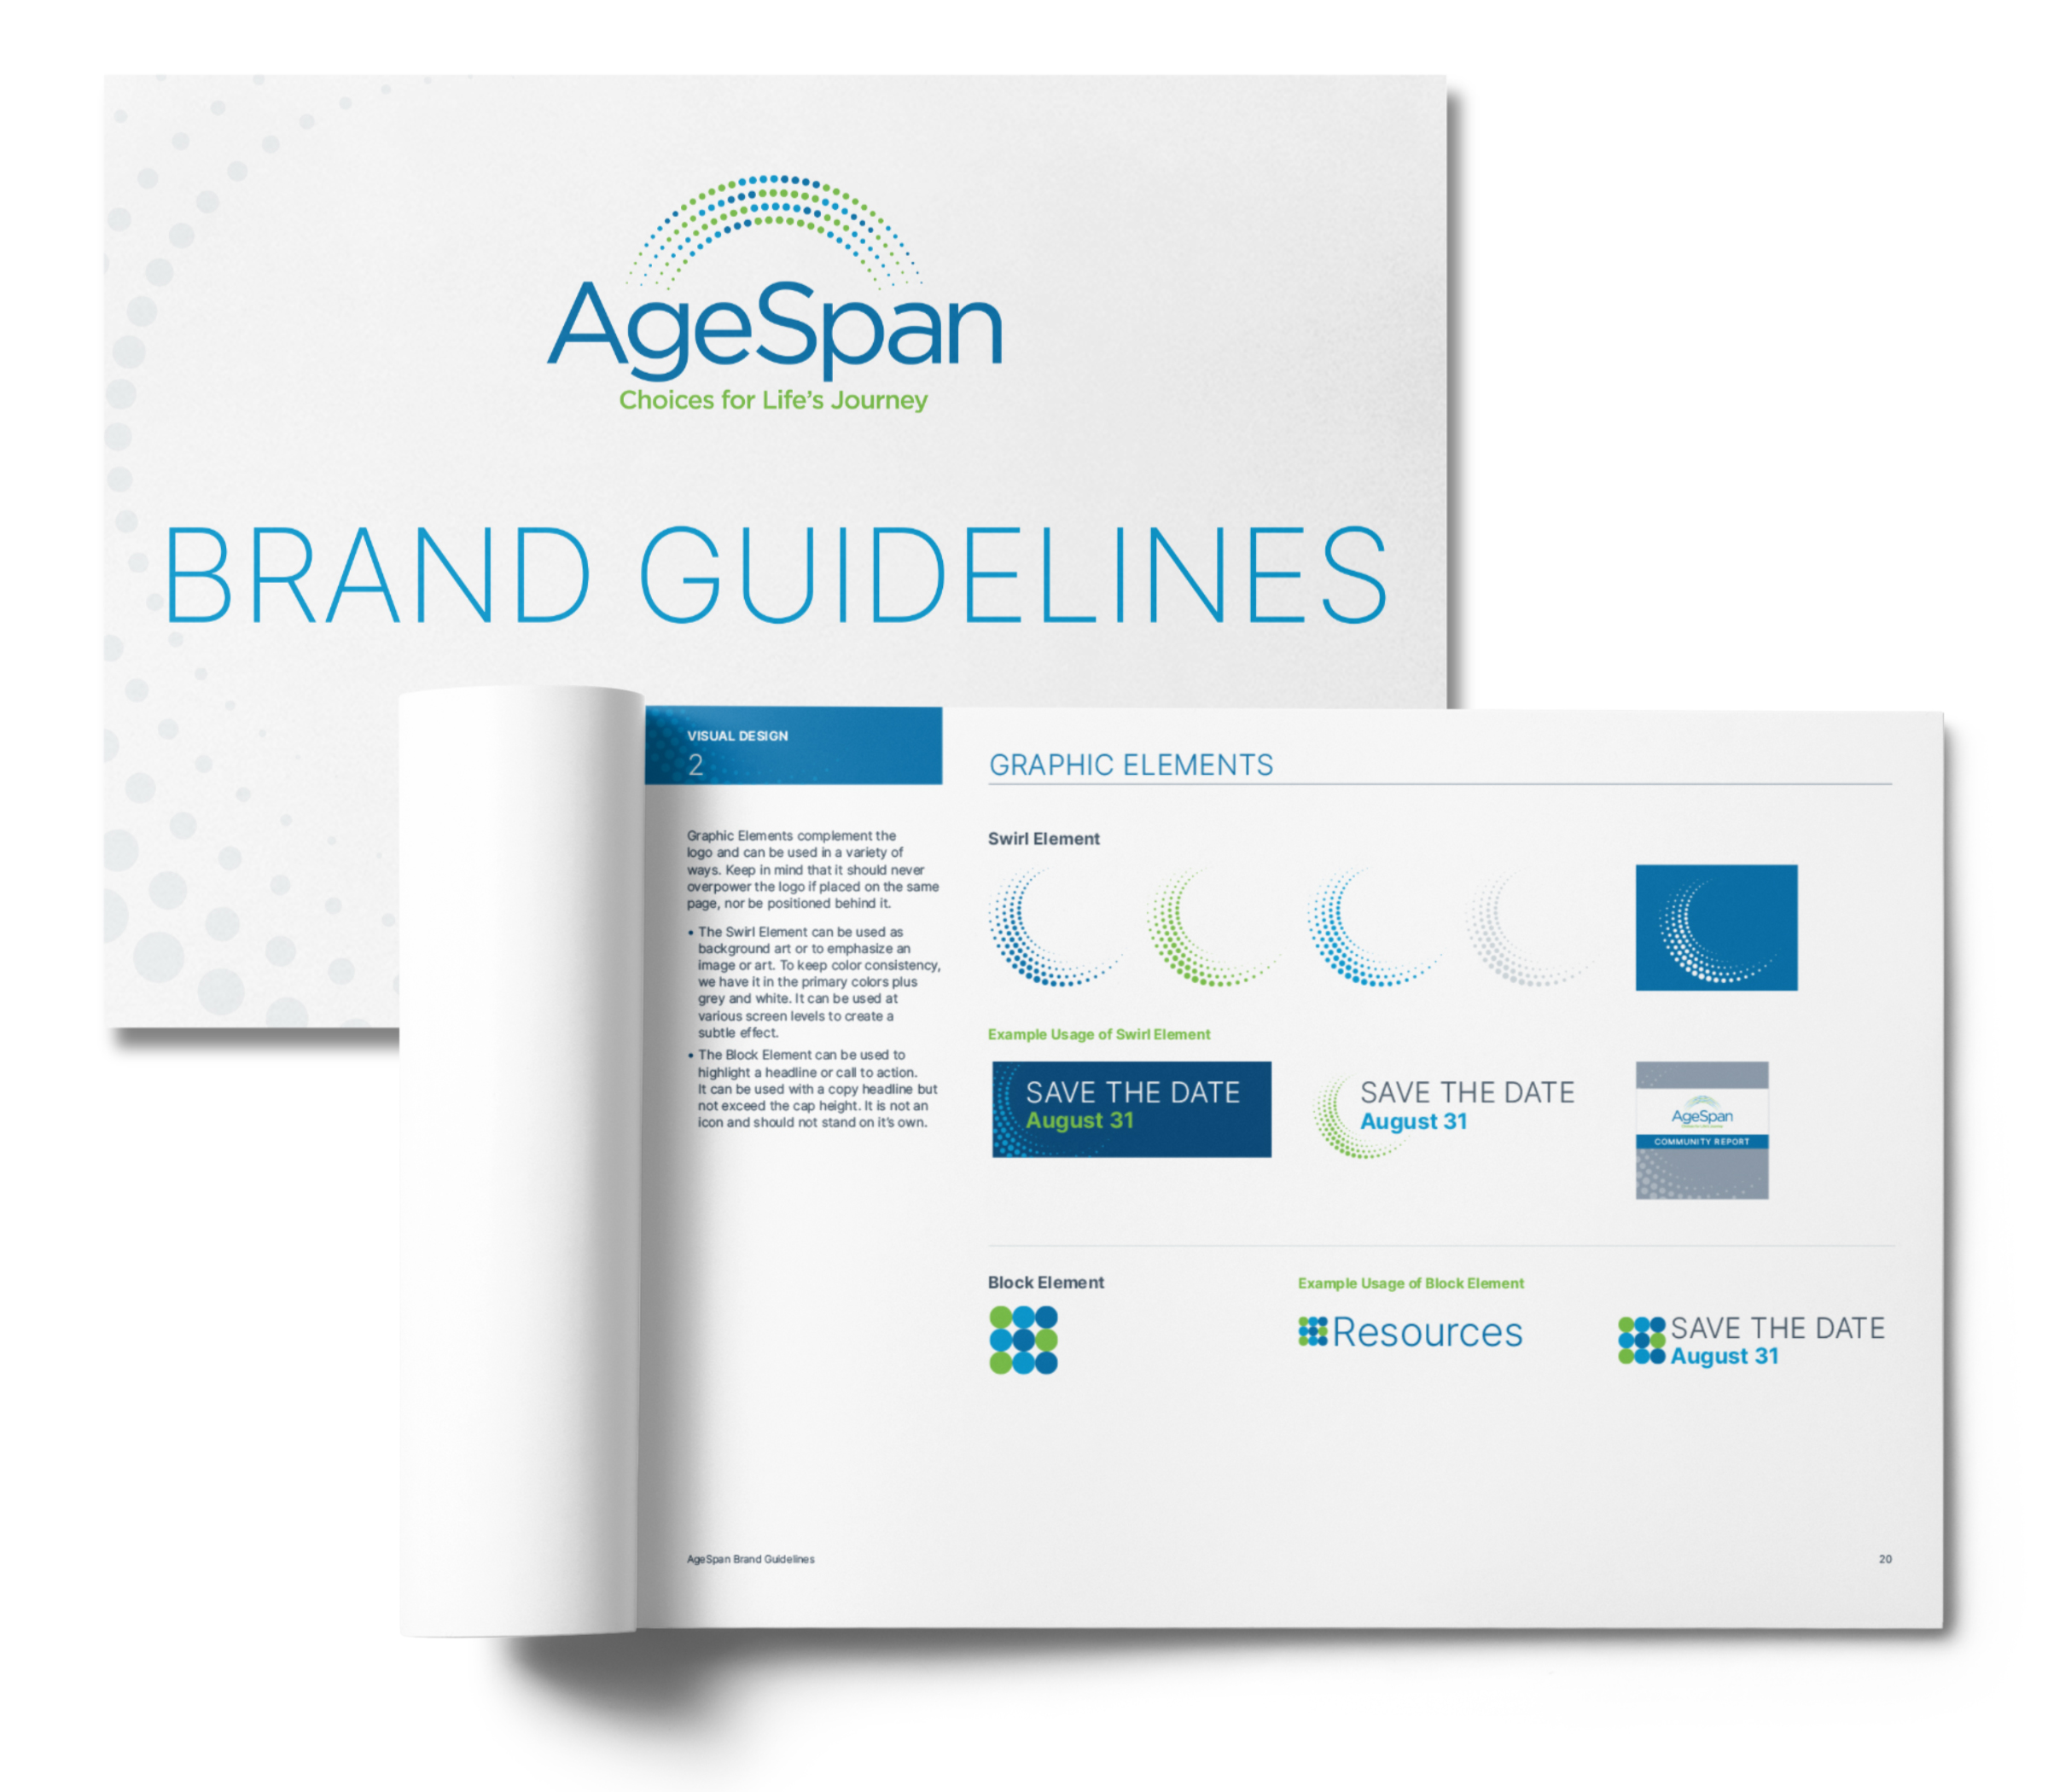 AgeSpan brand guide book